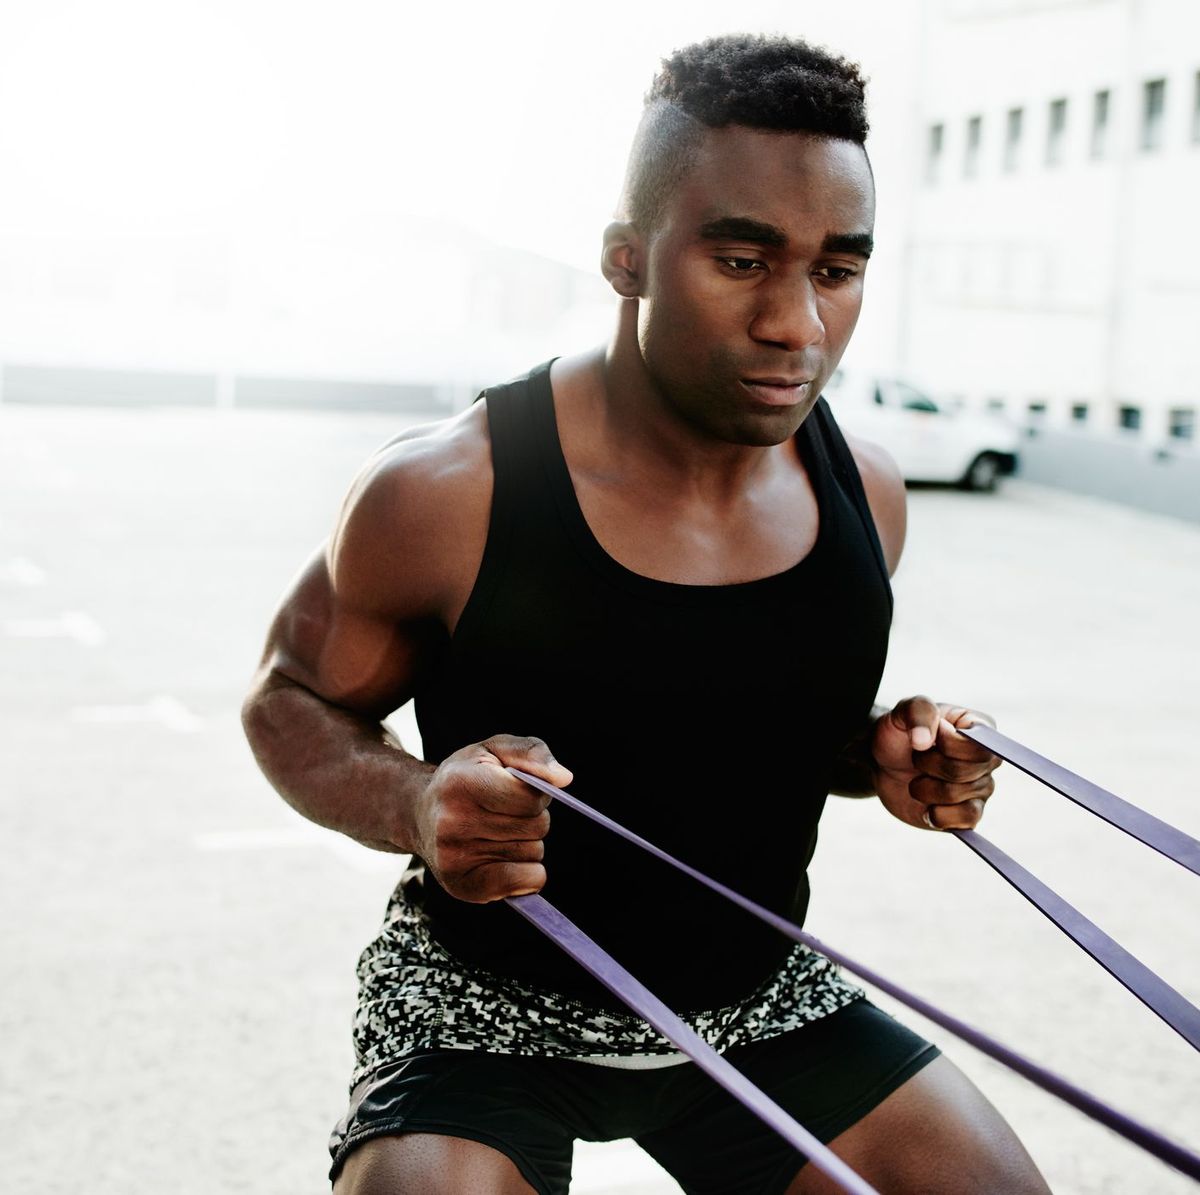 Resistance Training Tips: Choosing the Best Resistance Band